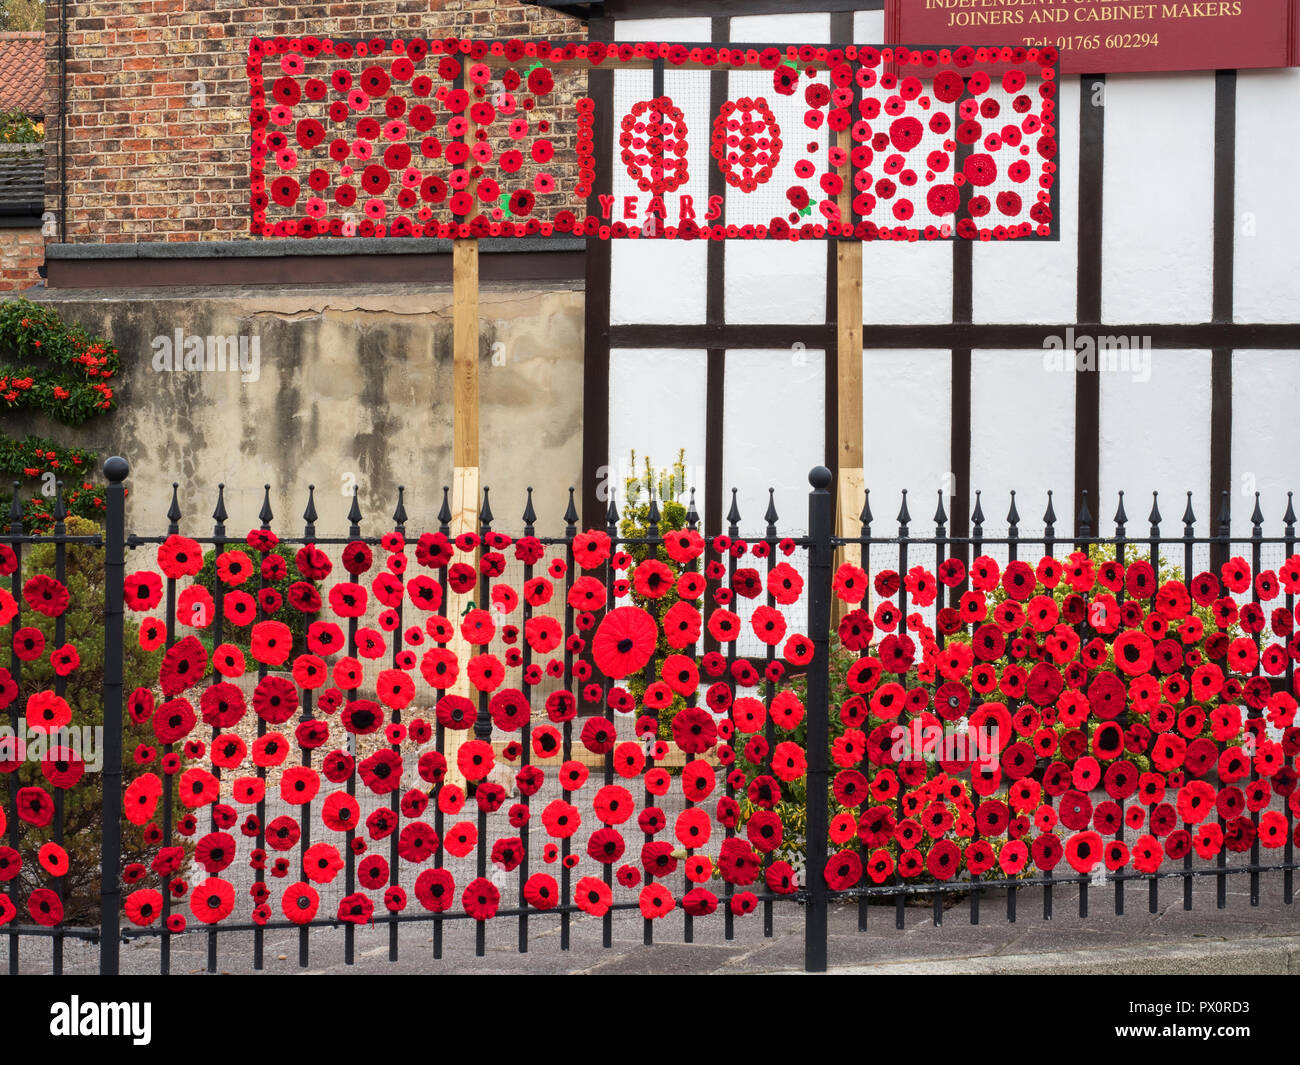 Knitted and crocheted poppy display commemorating 100 years since the end of the First World War Ripon Yorkshire England Stock Photo